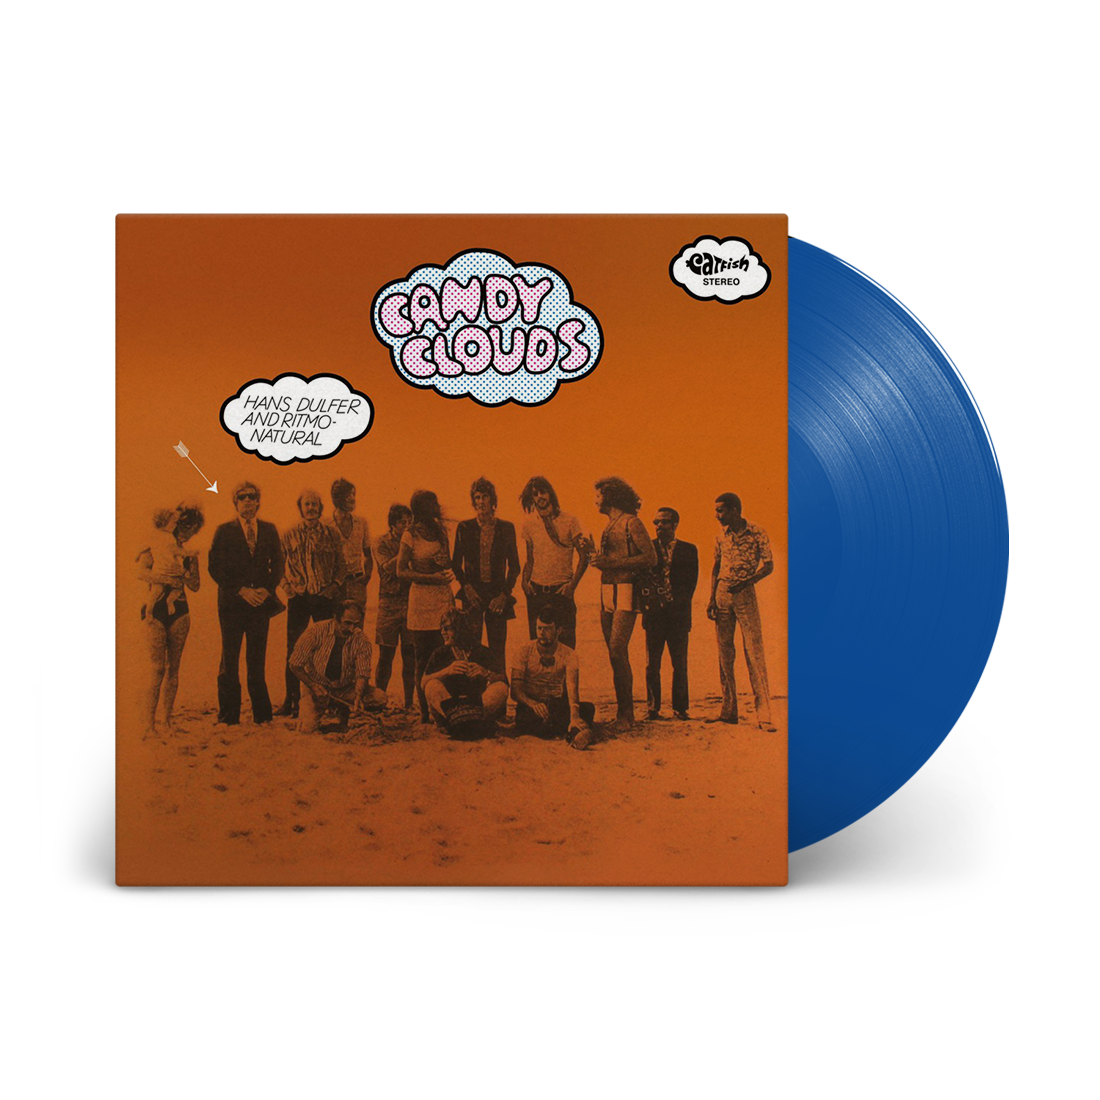 Candy Clouds: Limited Edition Blue Vinyl LP